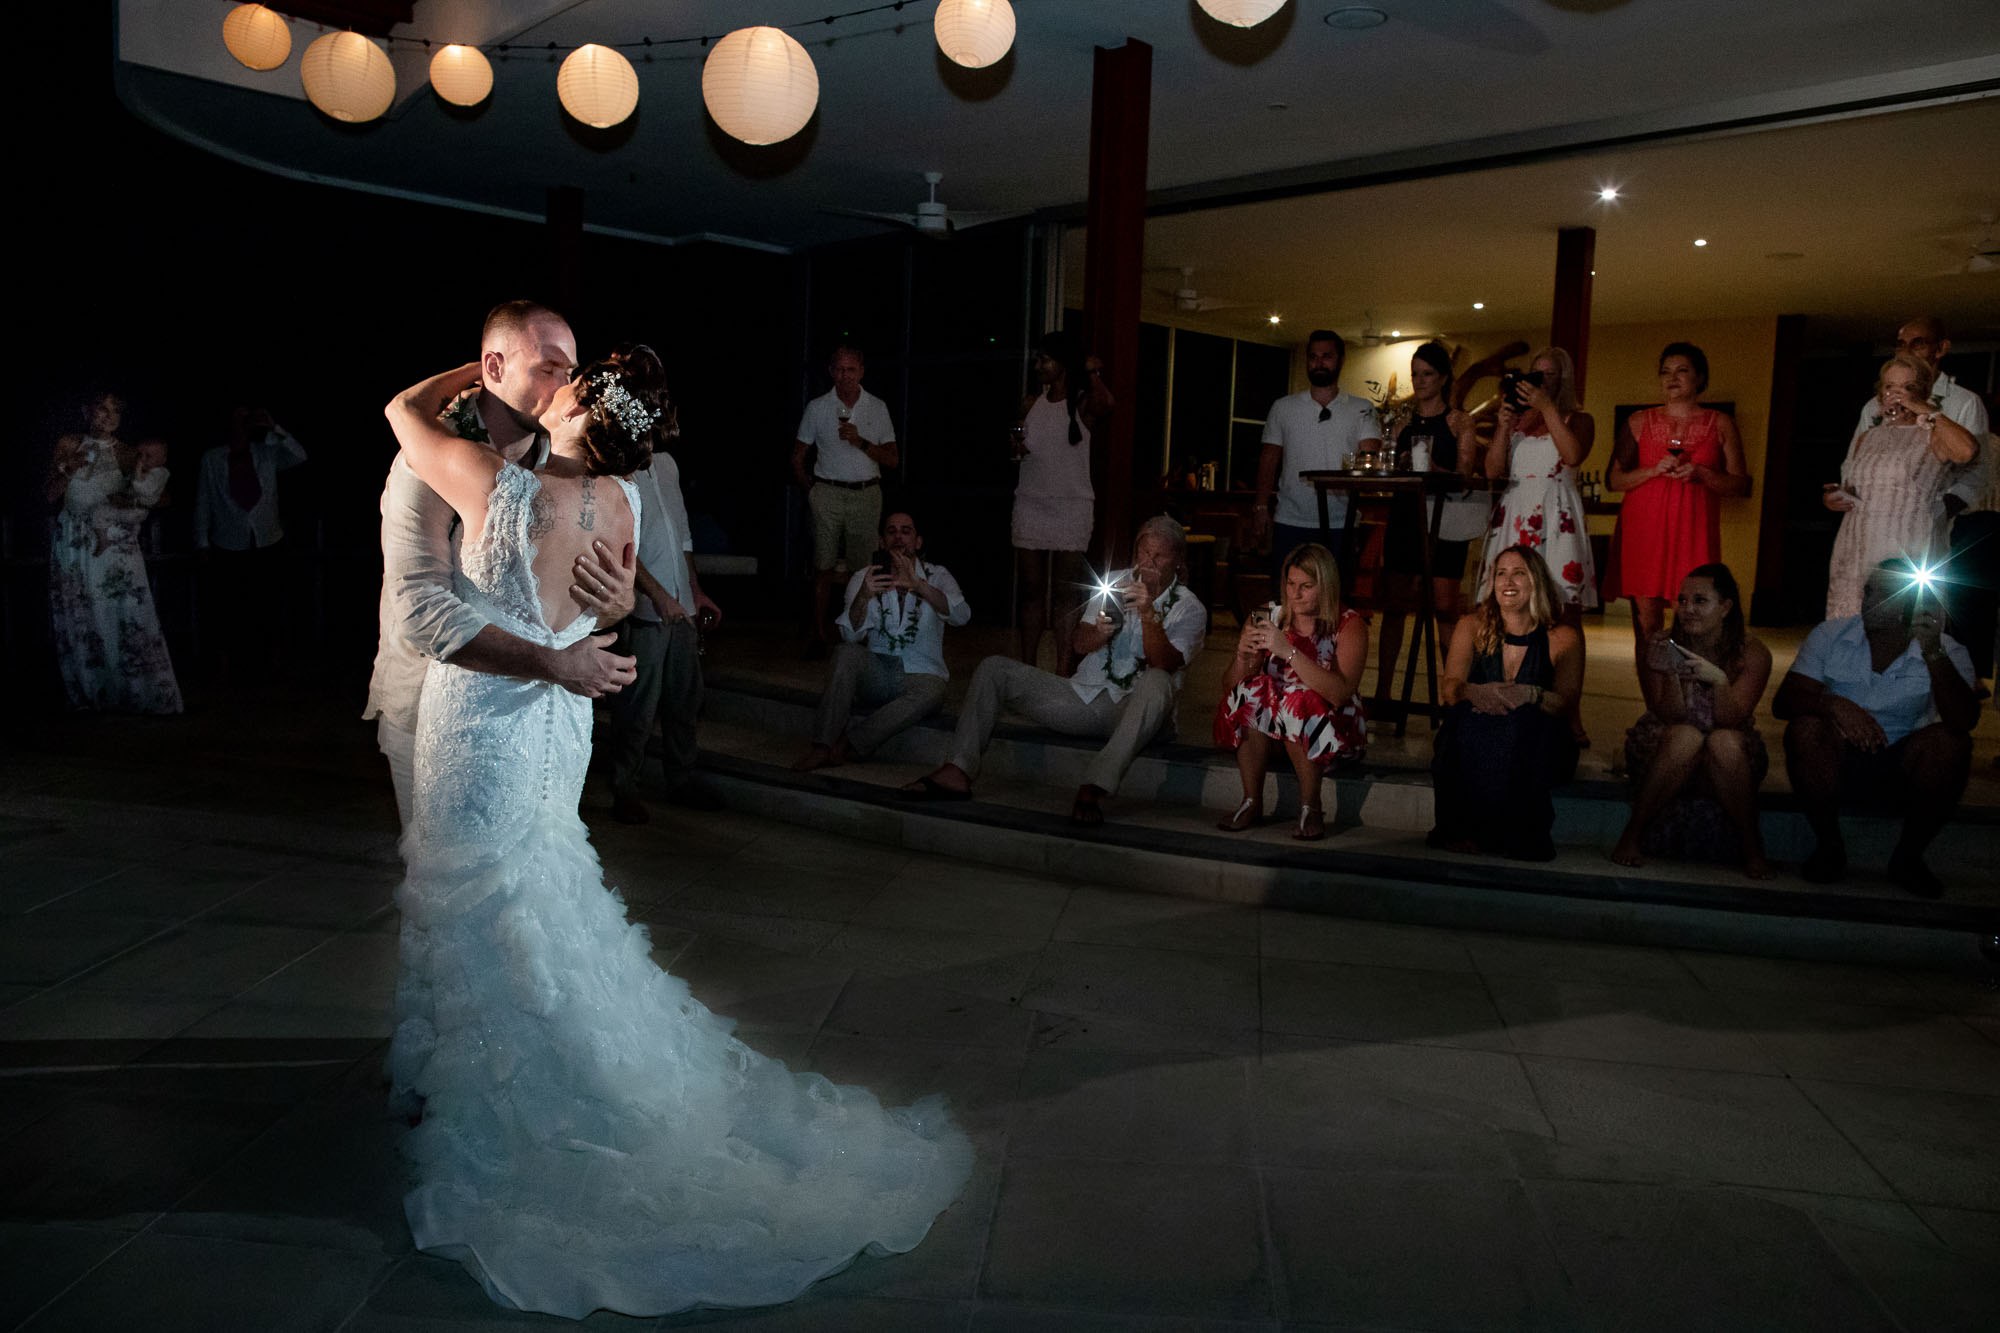 An epic shot of the bride and groom's first dance